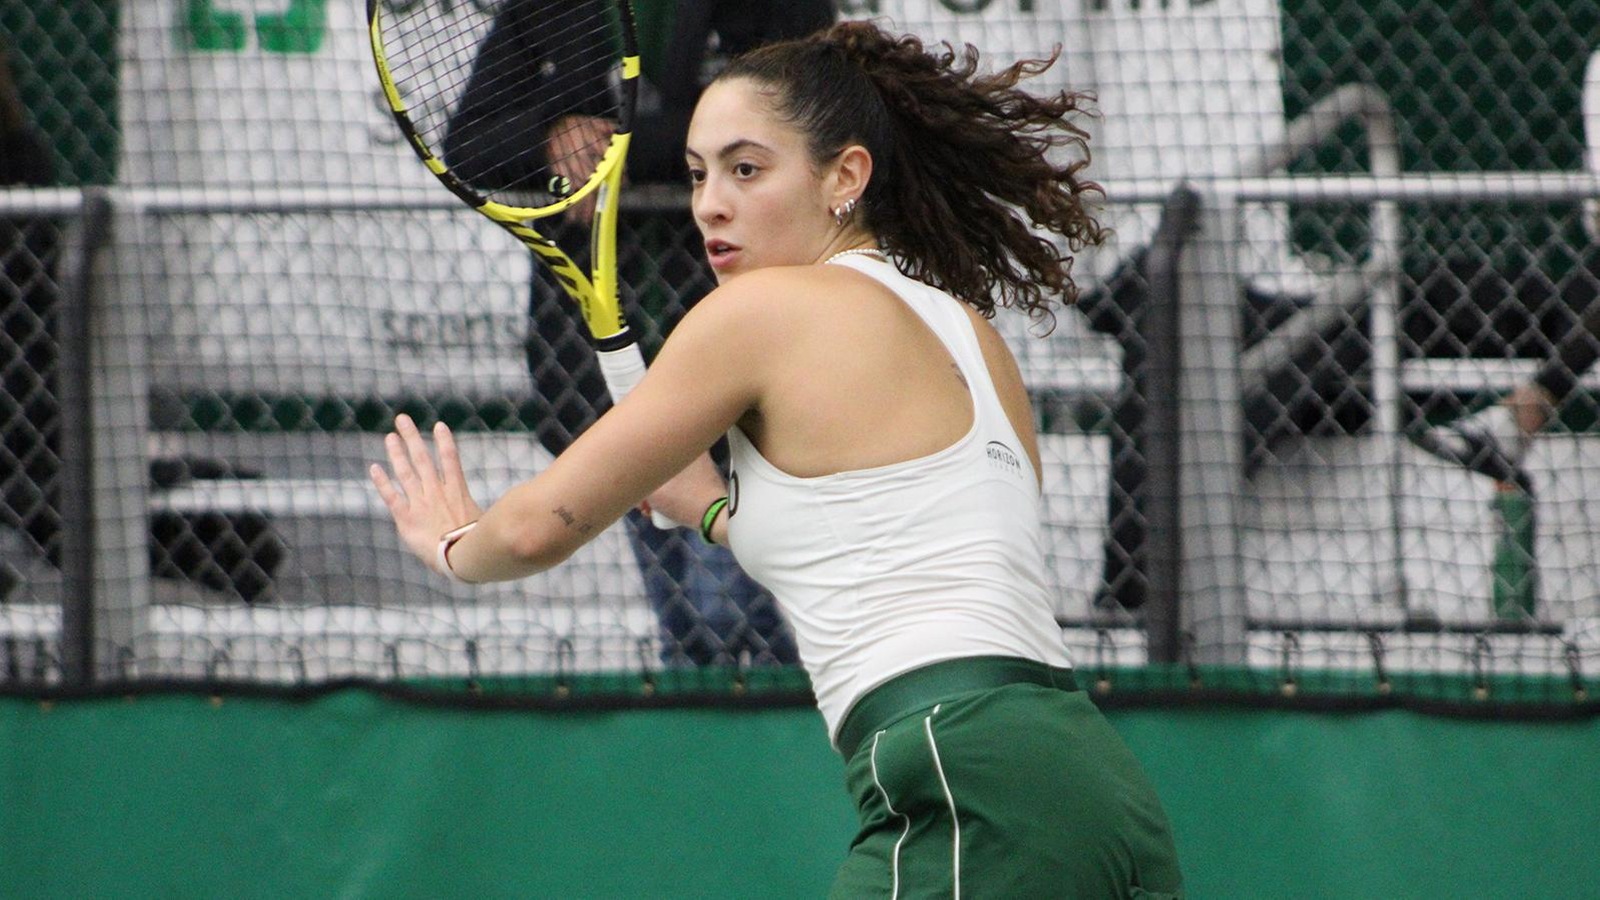 Cleveland State’s Tounsi Named To #HLTennis All-Academic Team